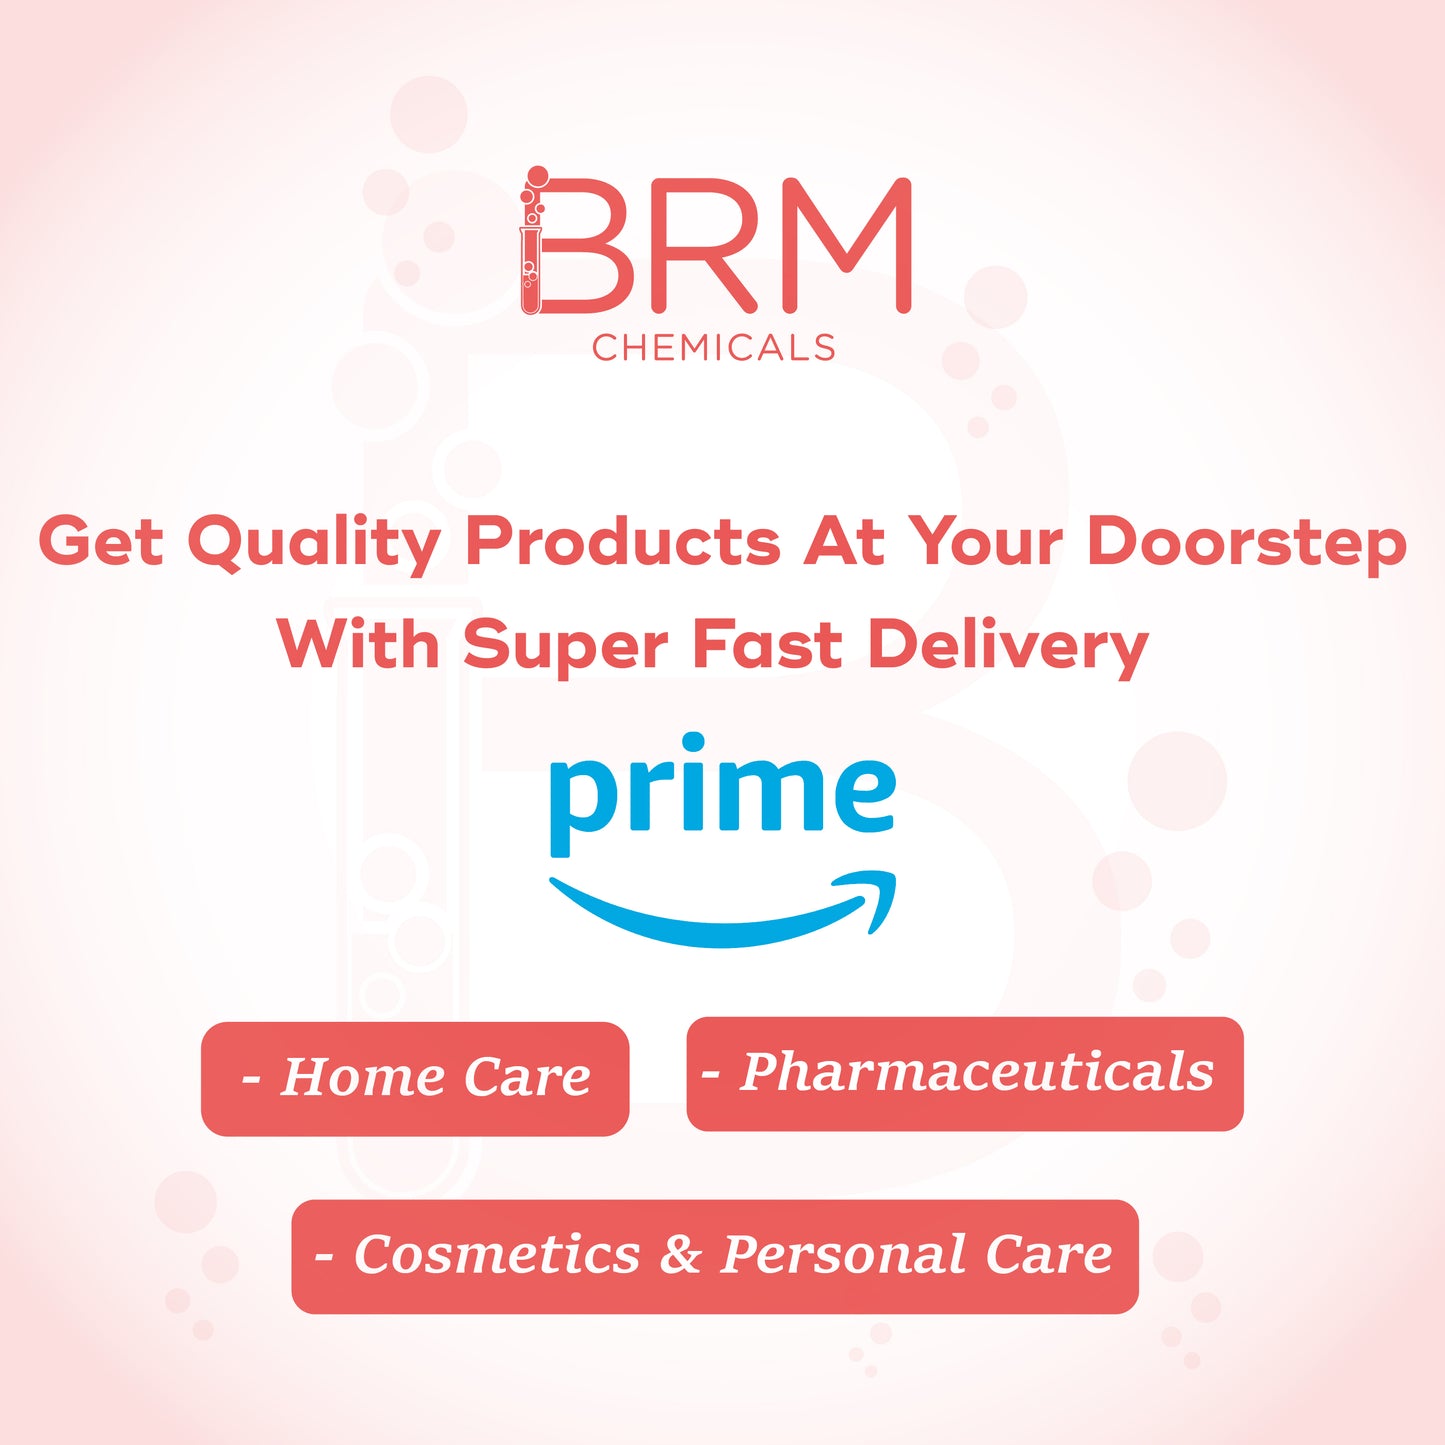 brm chemicals' poster for fast delivery to doorsteps